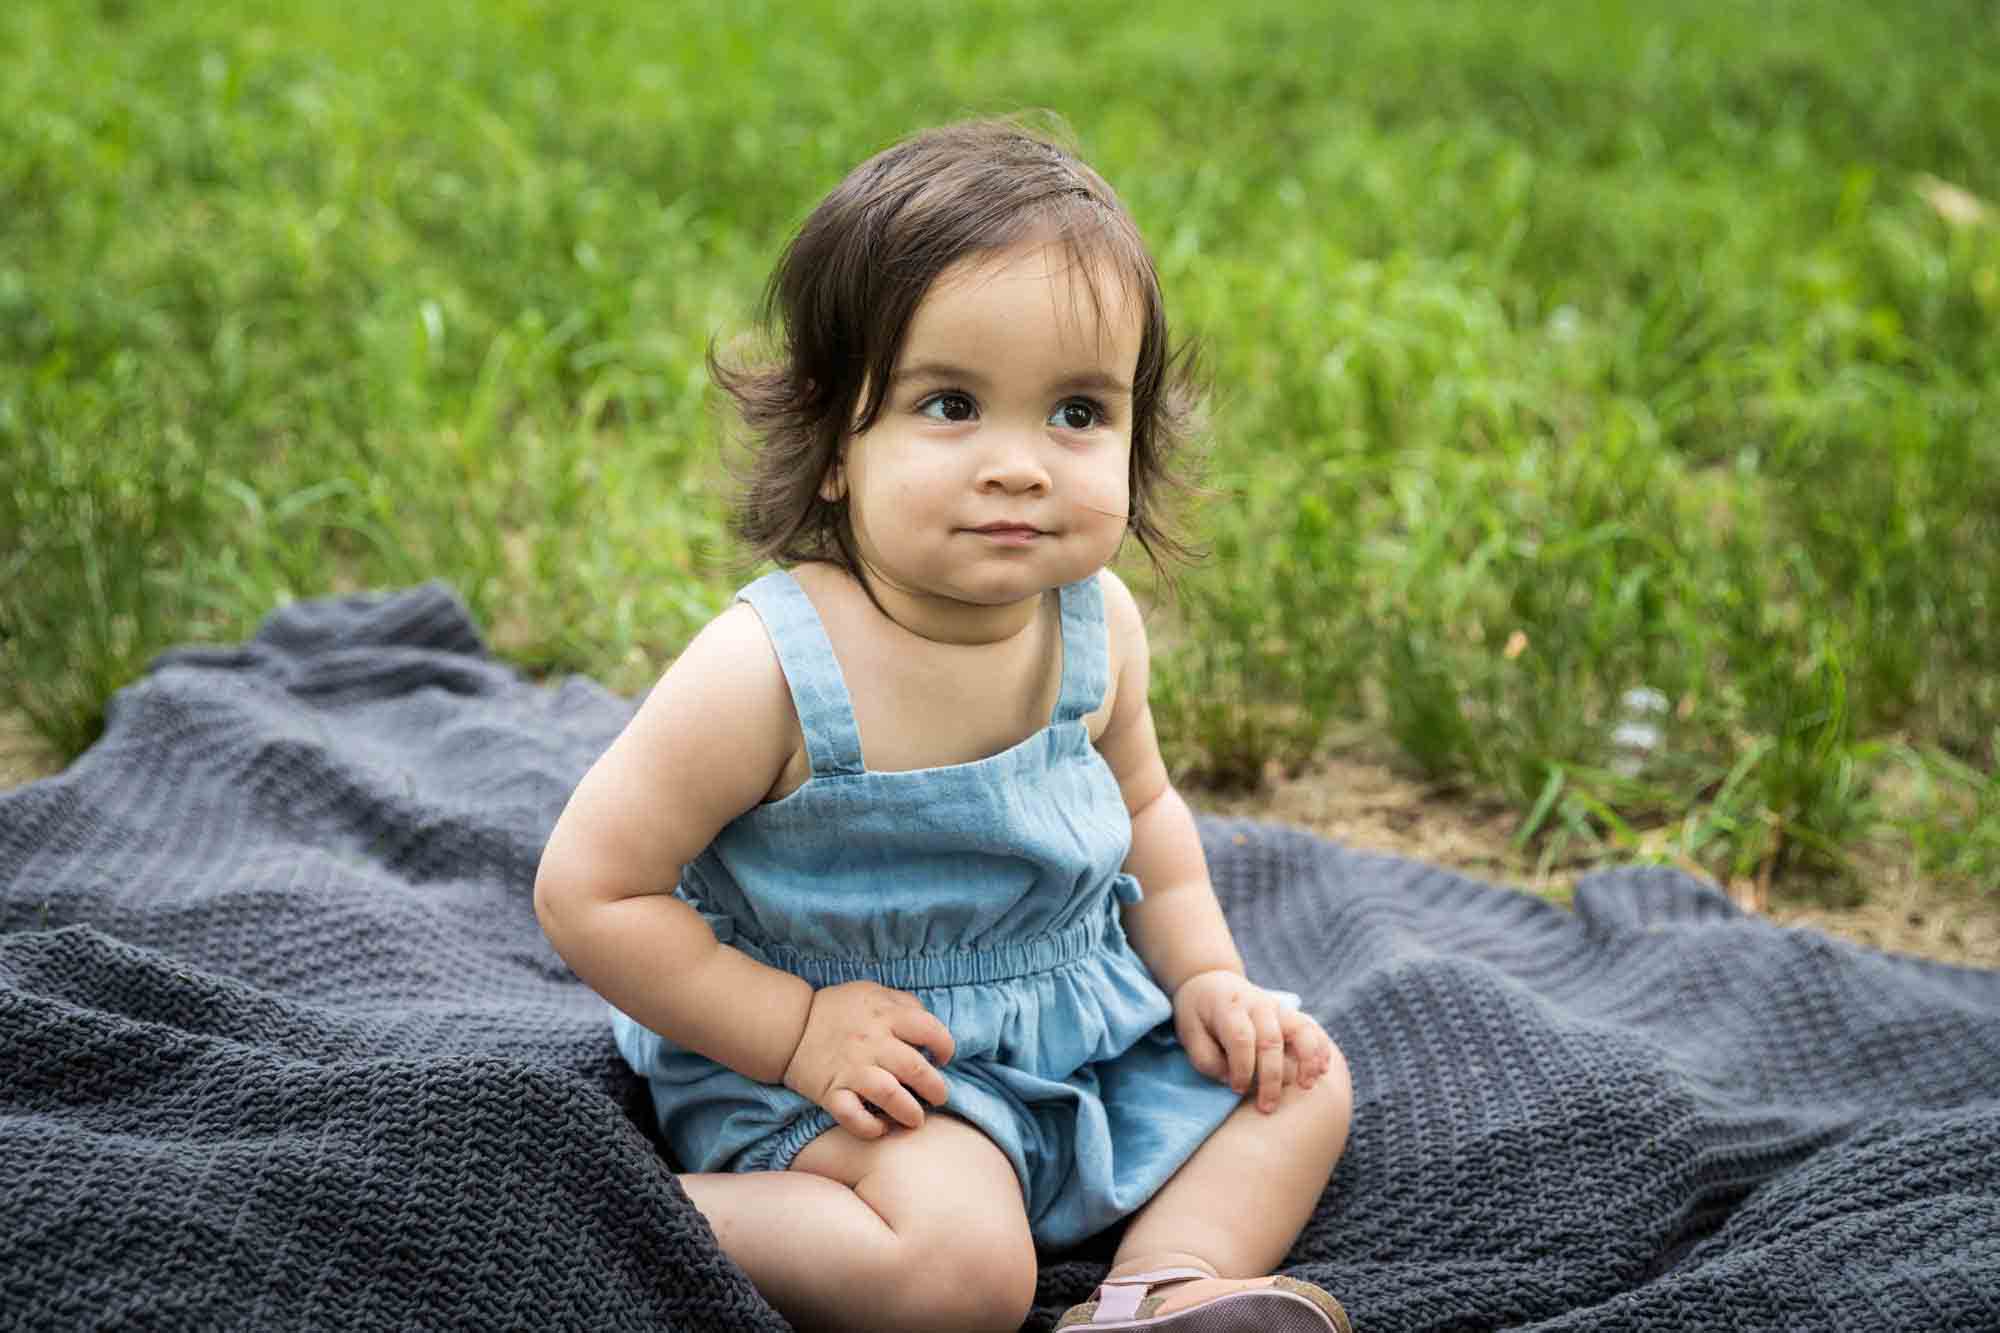 Little girl sitting on a gray blanket in the grass for an article on how to solve family portrait challenges